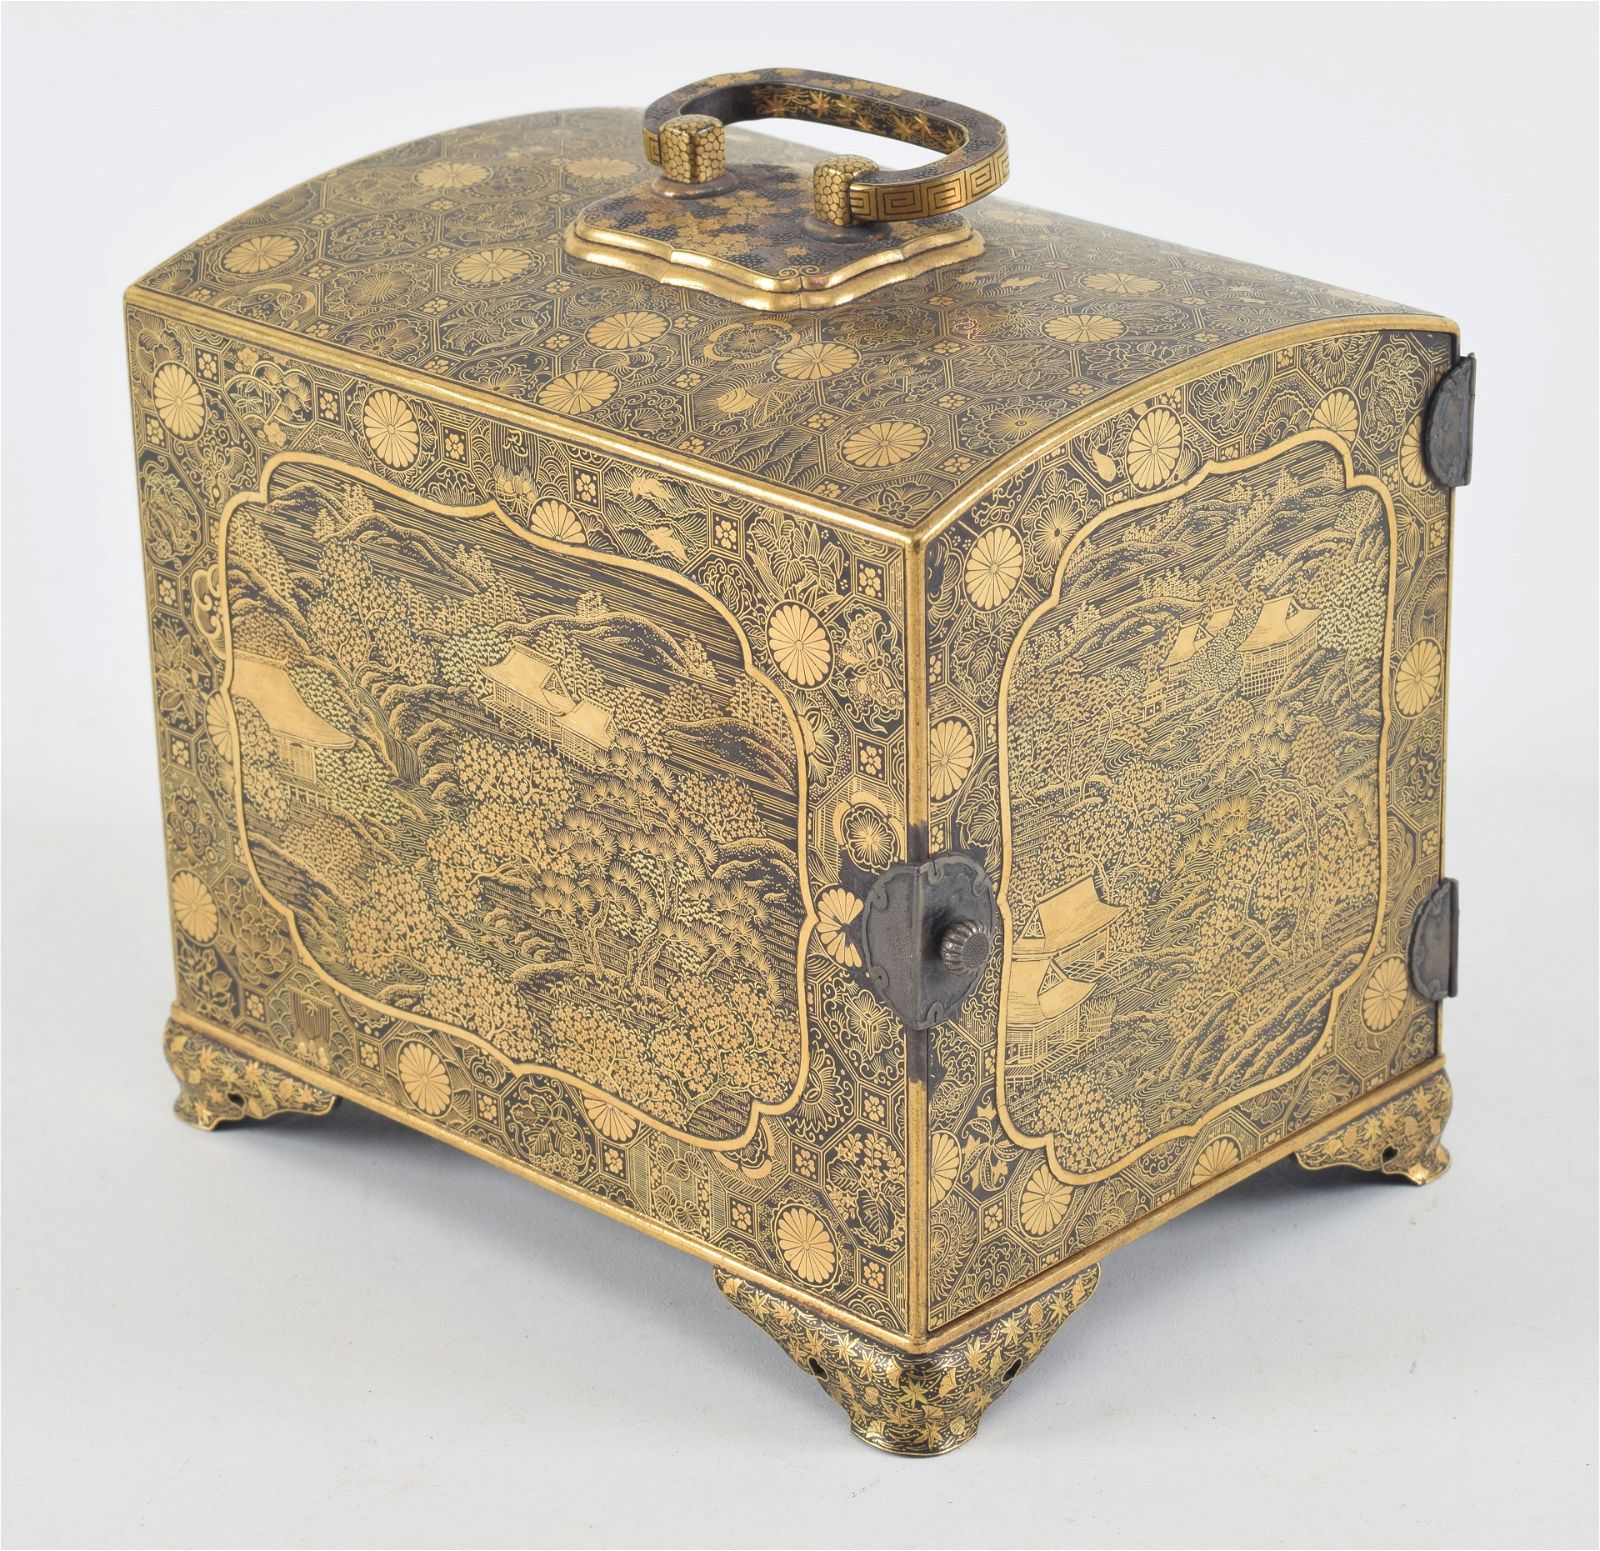 Japanese Meiji-era damascene box, which hammered for $30,000 and sold for $38,100 with buyer’s premium at Tremont Auctions.